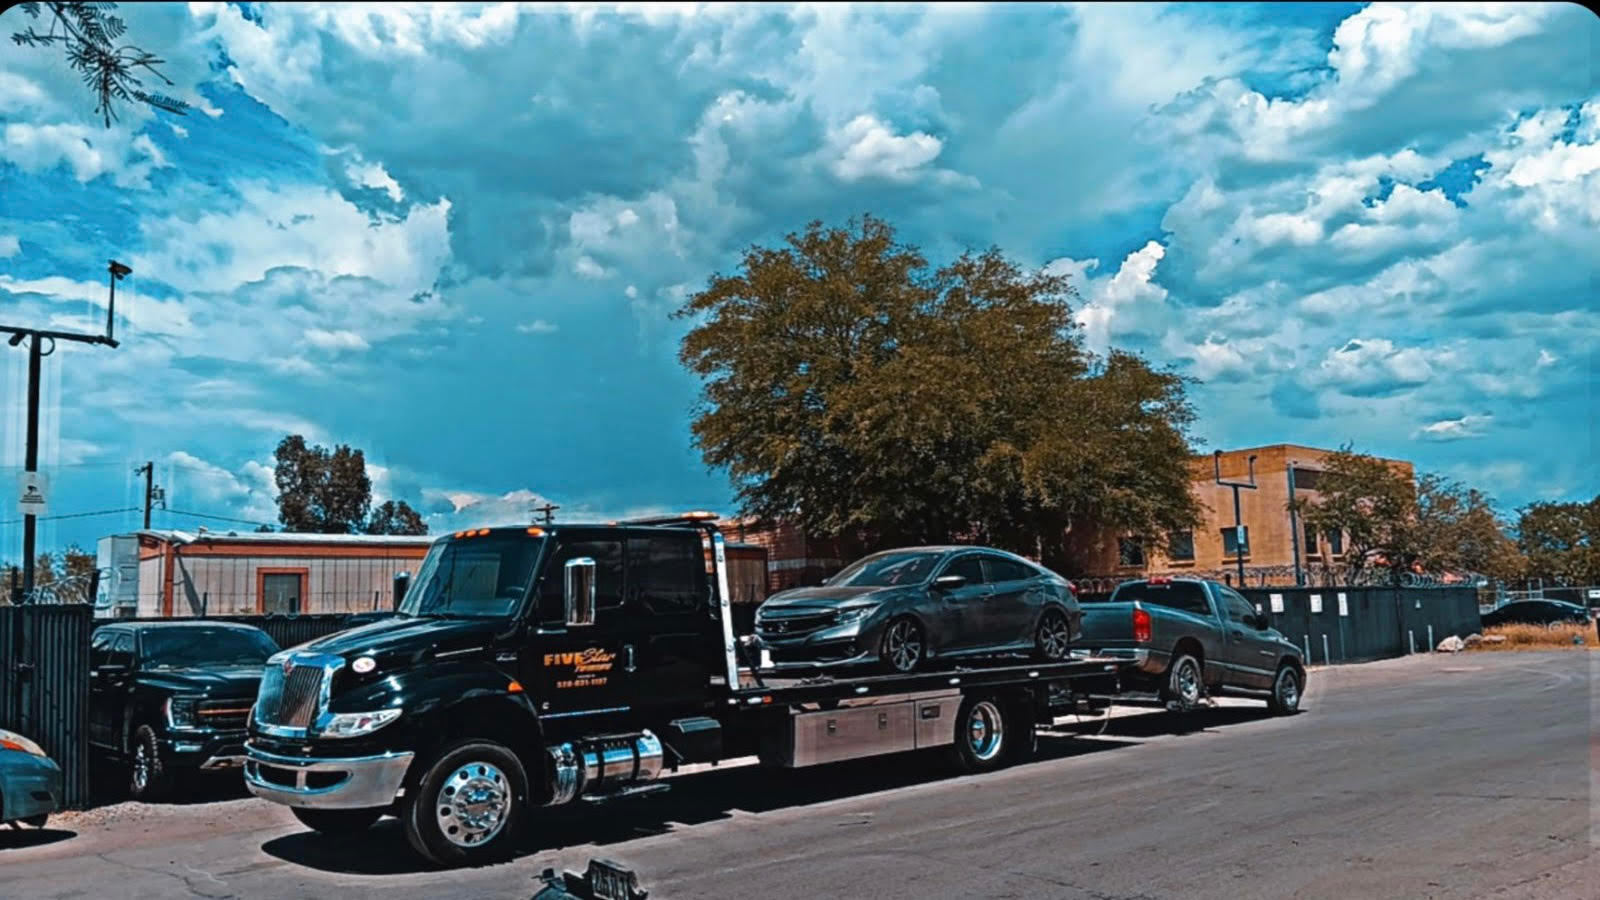 Don't get stuck without a tow truck! Call now! Five Star Towing Tucson (520)631-1197